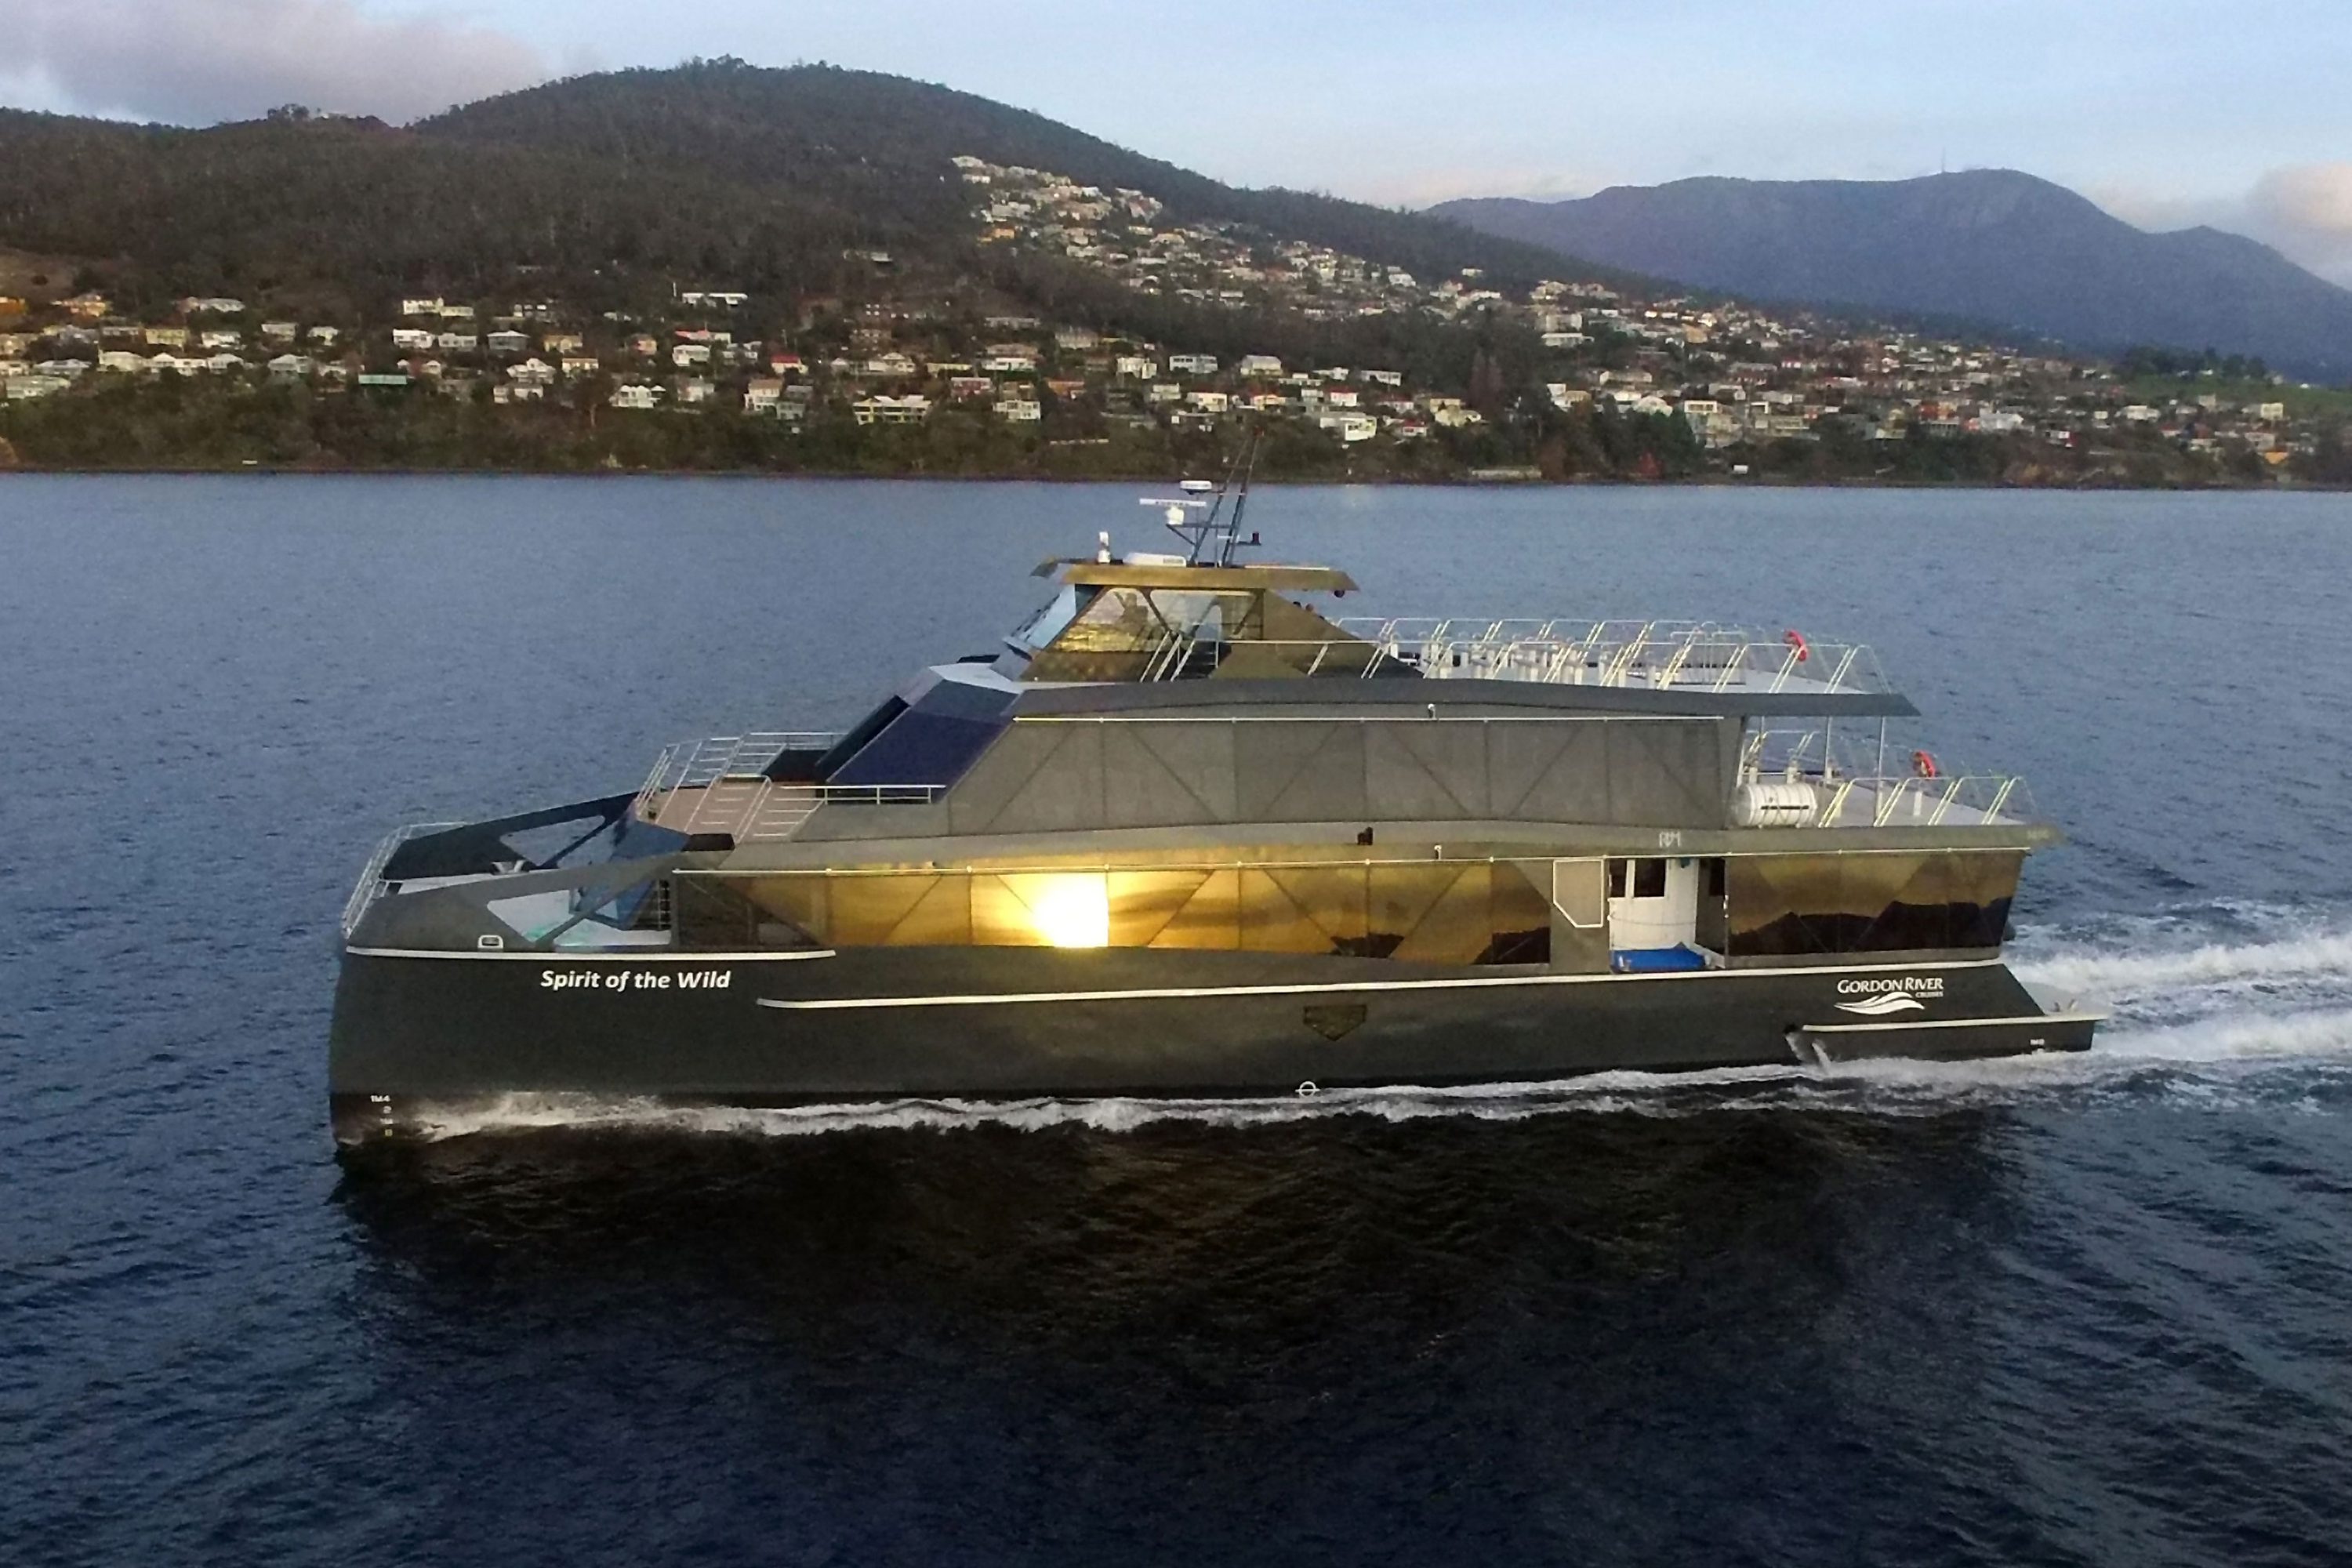 Silent Drive Becomes Reality as Eco Tour Vessel Launched